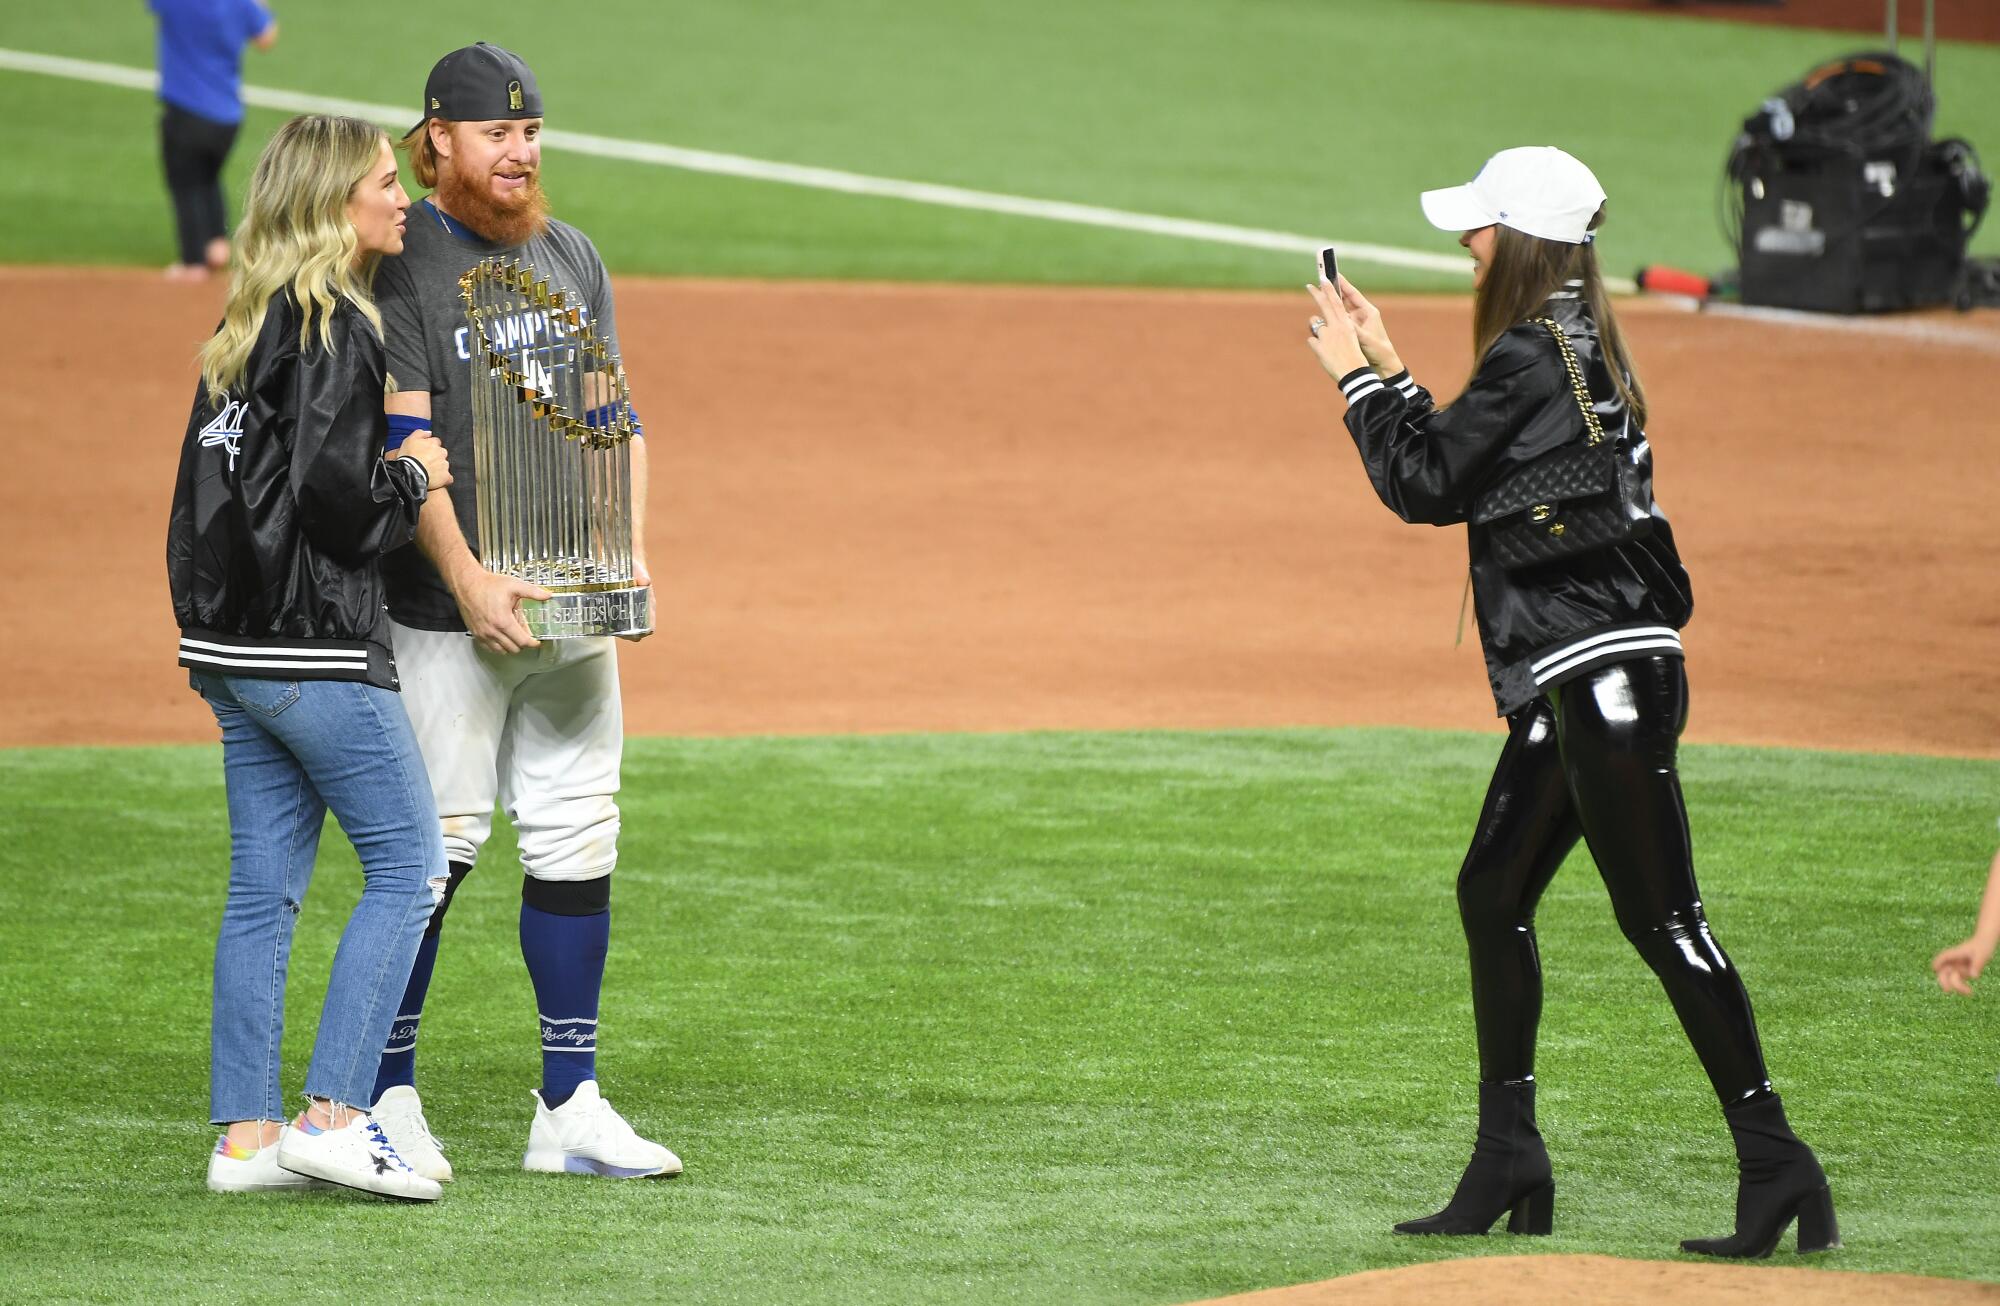 Dodgers third baseman Justin Turner poses for a photo while standing next to his wife, Kourtney Pogue.